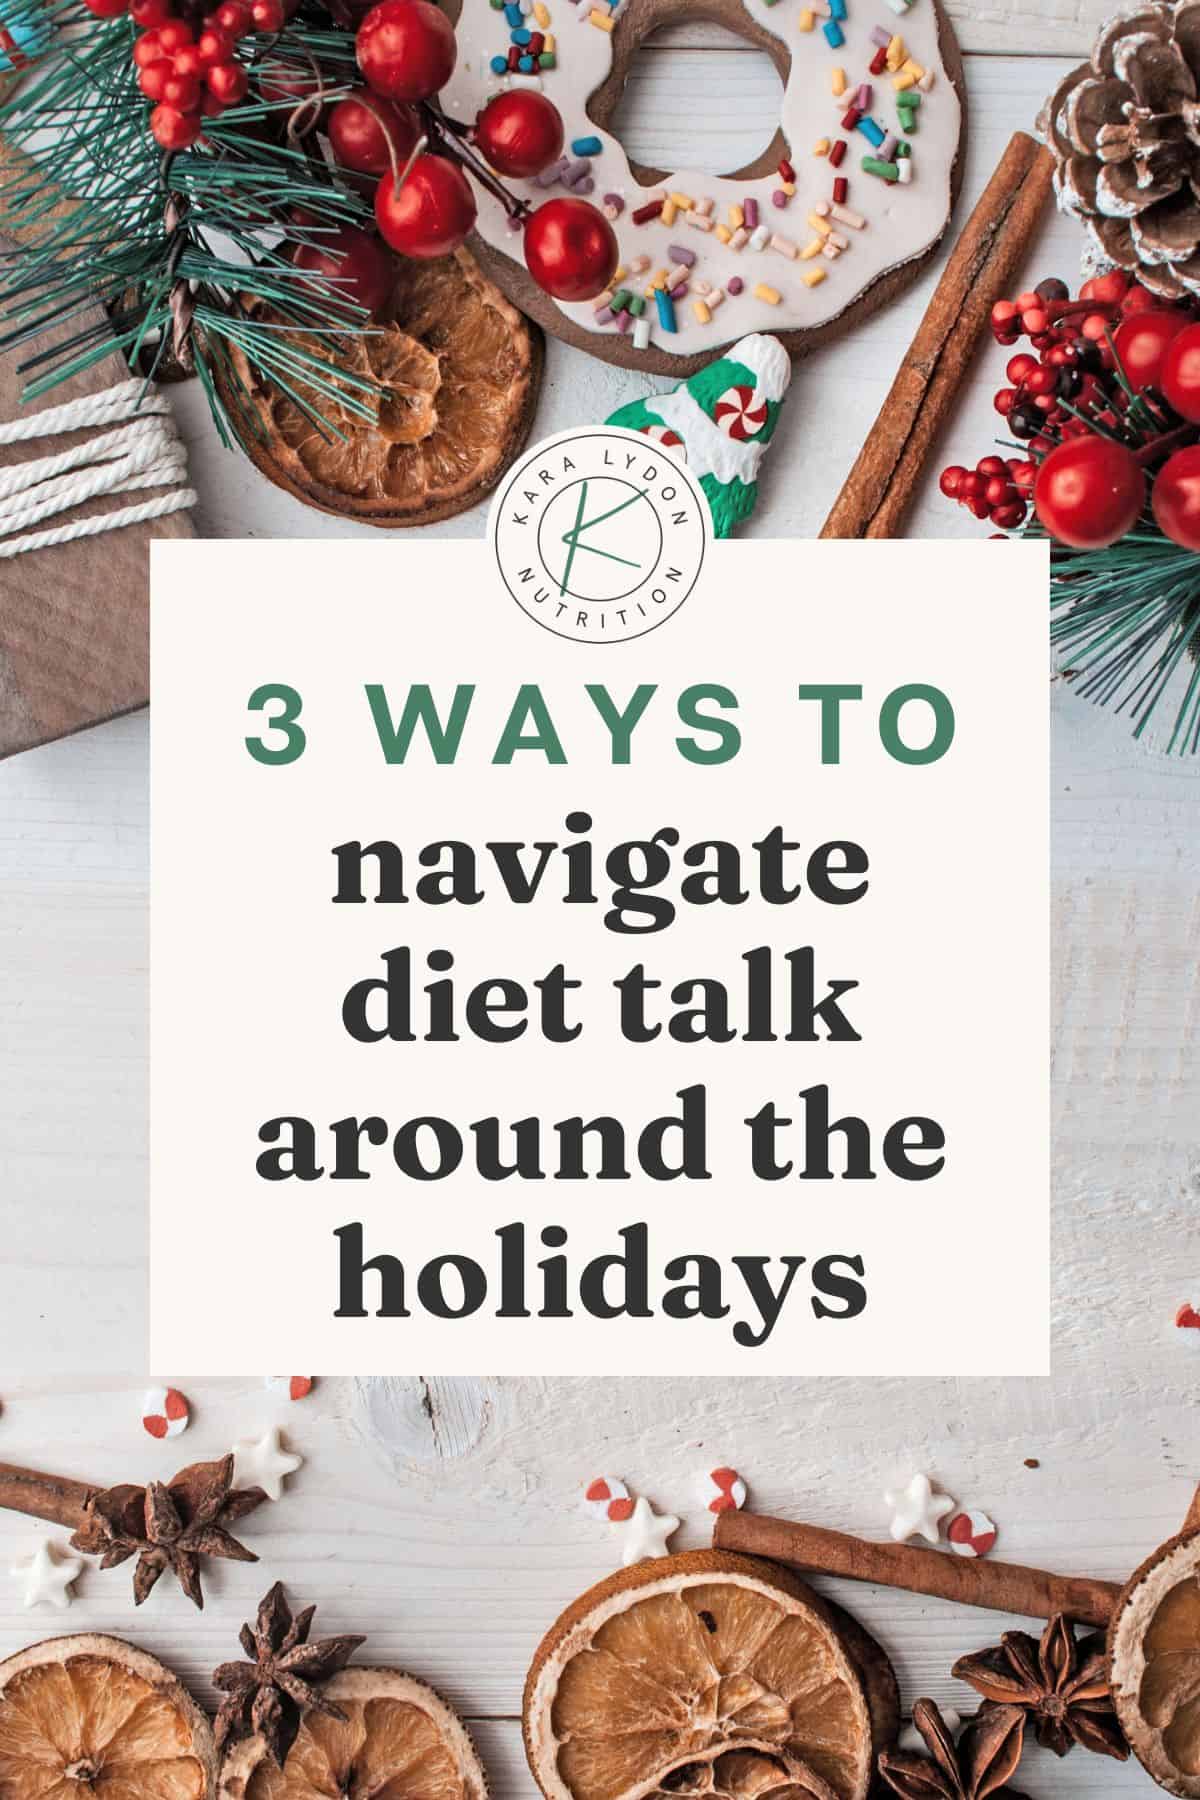 image with dried oranges and holiday decor with text that says "3 ways to navigate diet talk around the holidays"